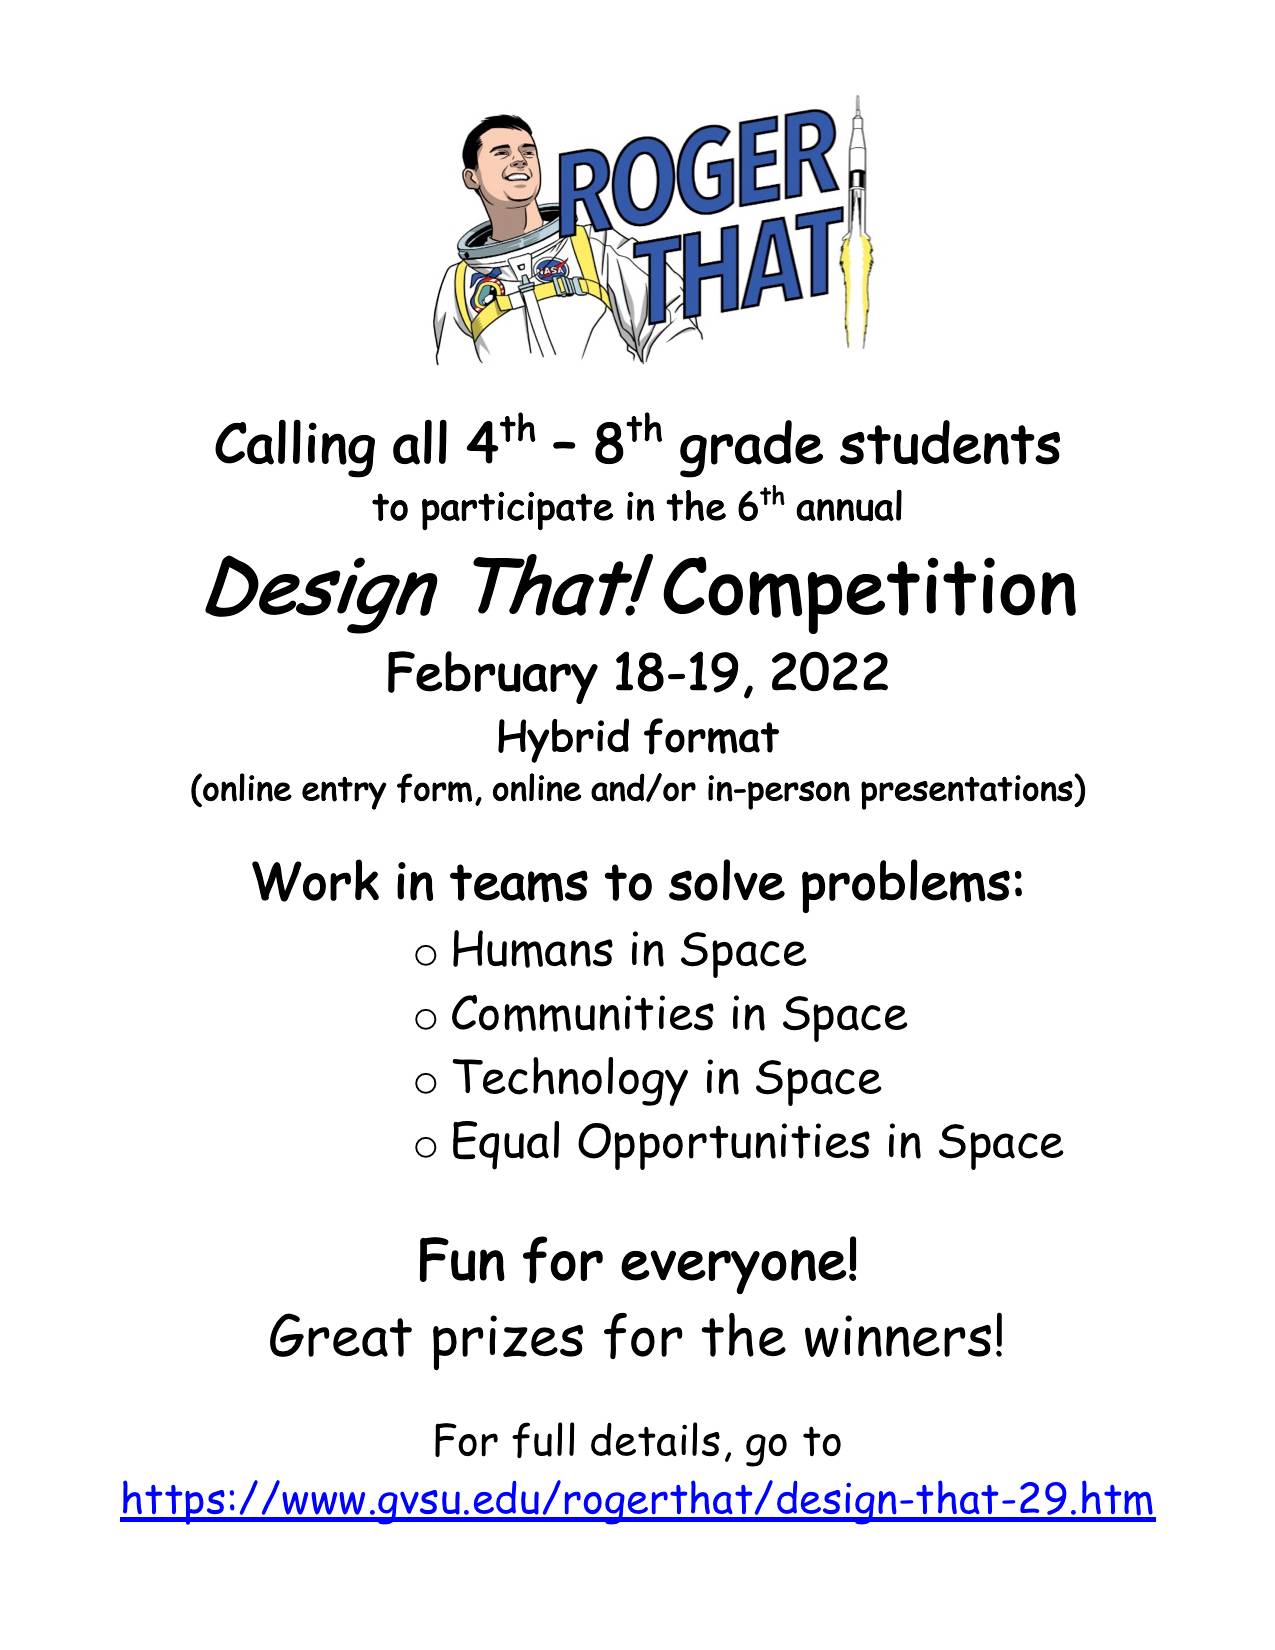 Calling all 4th &#8211; 8th grade students to participate in the 6th annual Design That! Competition February 18-19, 2022 Hybrid format  (online entry form, online and/or in-person presentations)  Work in teams to solve problems: o	Humans in Space o	Communities in Space o	Technology in Space o	Equal Opportunities in Space Fun for everyone! Great prizes for the winners! For full details, go to https://www.gvsu.edu/rogerthat/design-that-29.htm